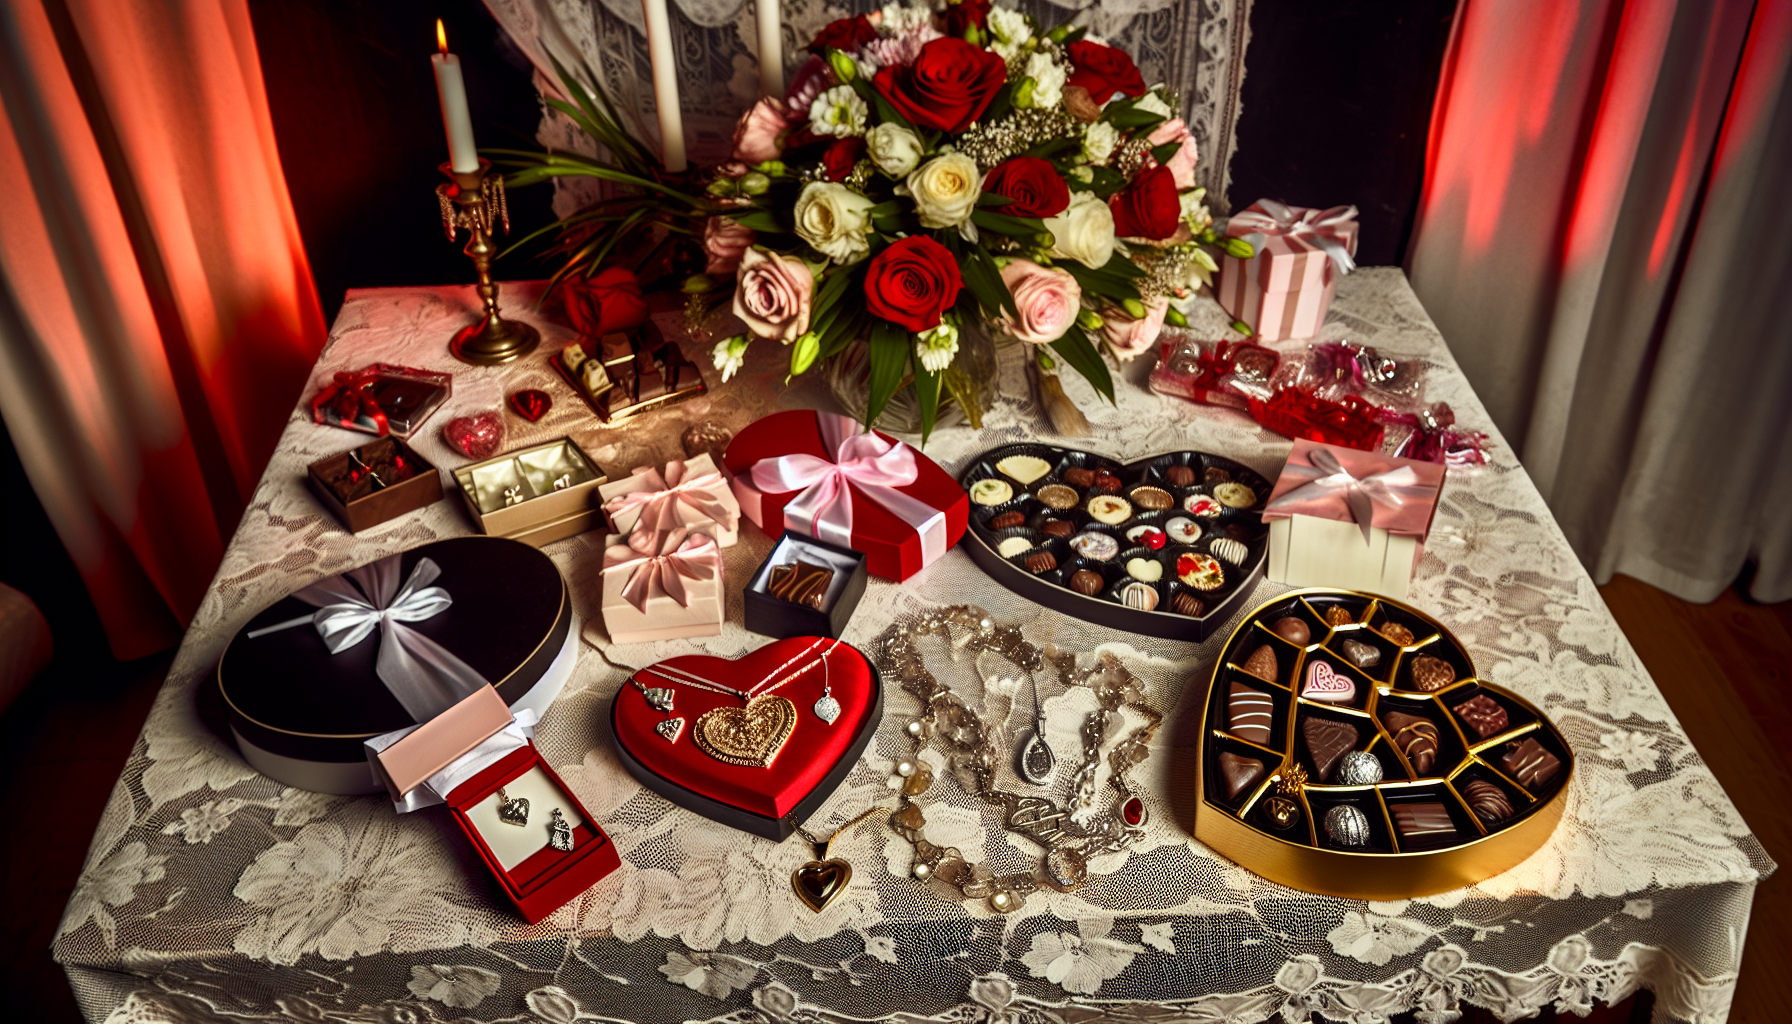 Various Valentine's Day gifts displayed on a table